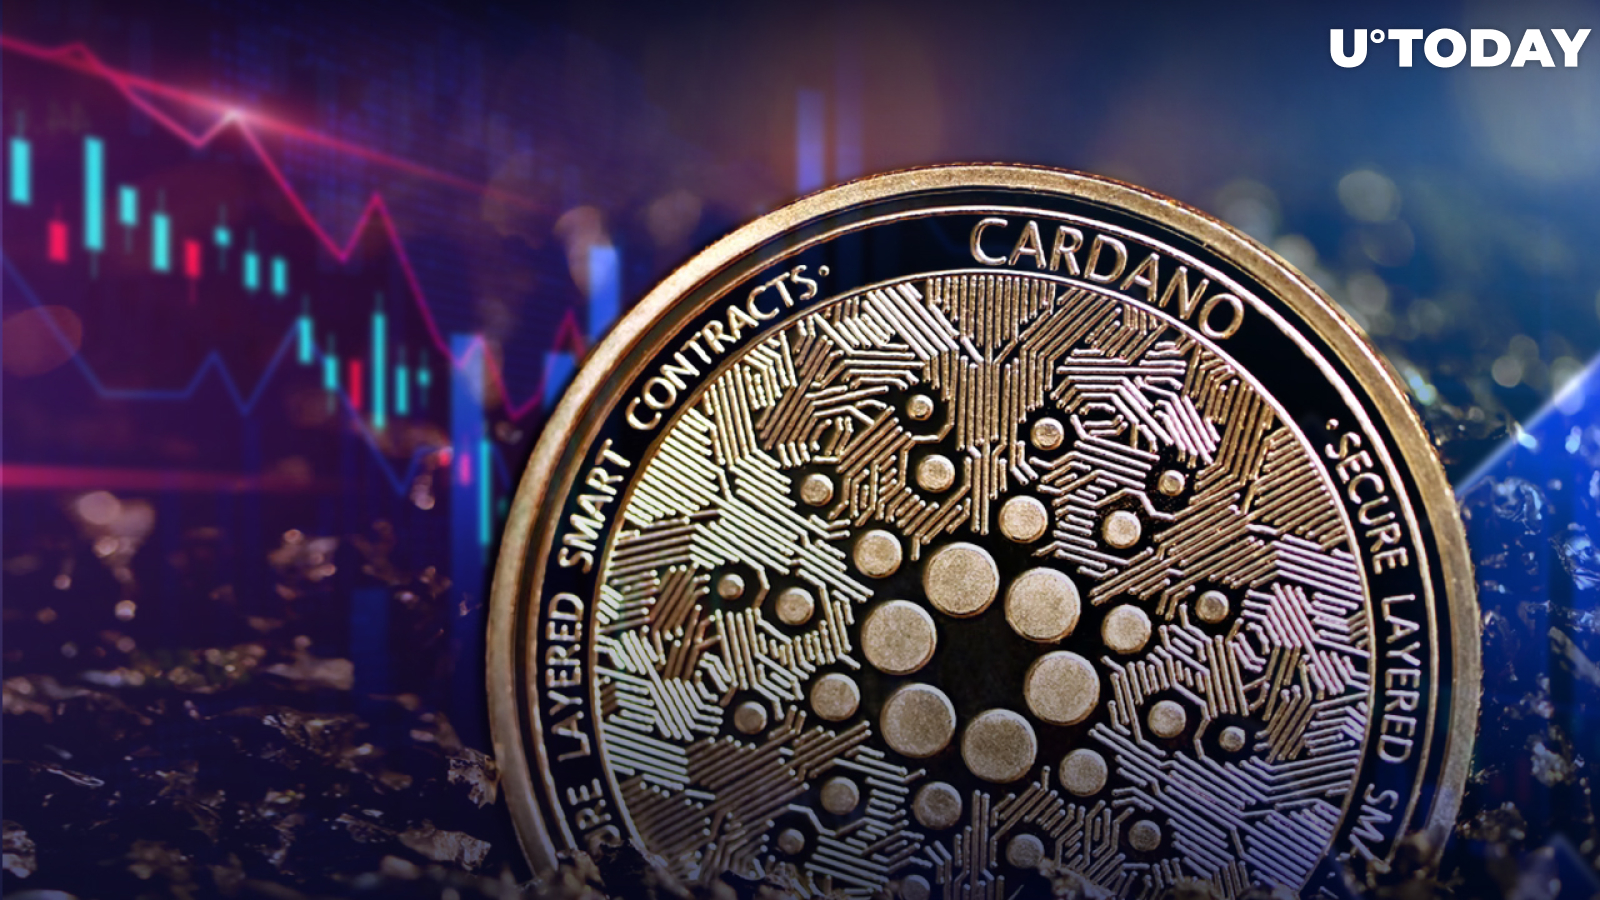 This Company Predicted Cardano to Fall off of Crypto's Top 10, But Something Went Horribly Wrong